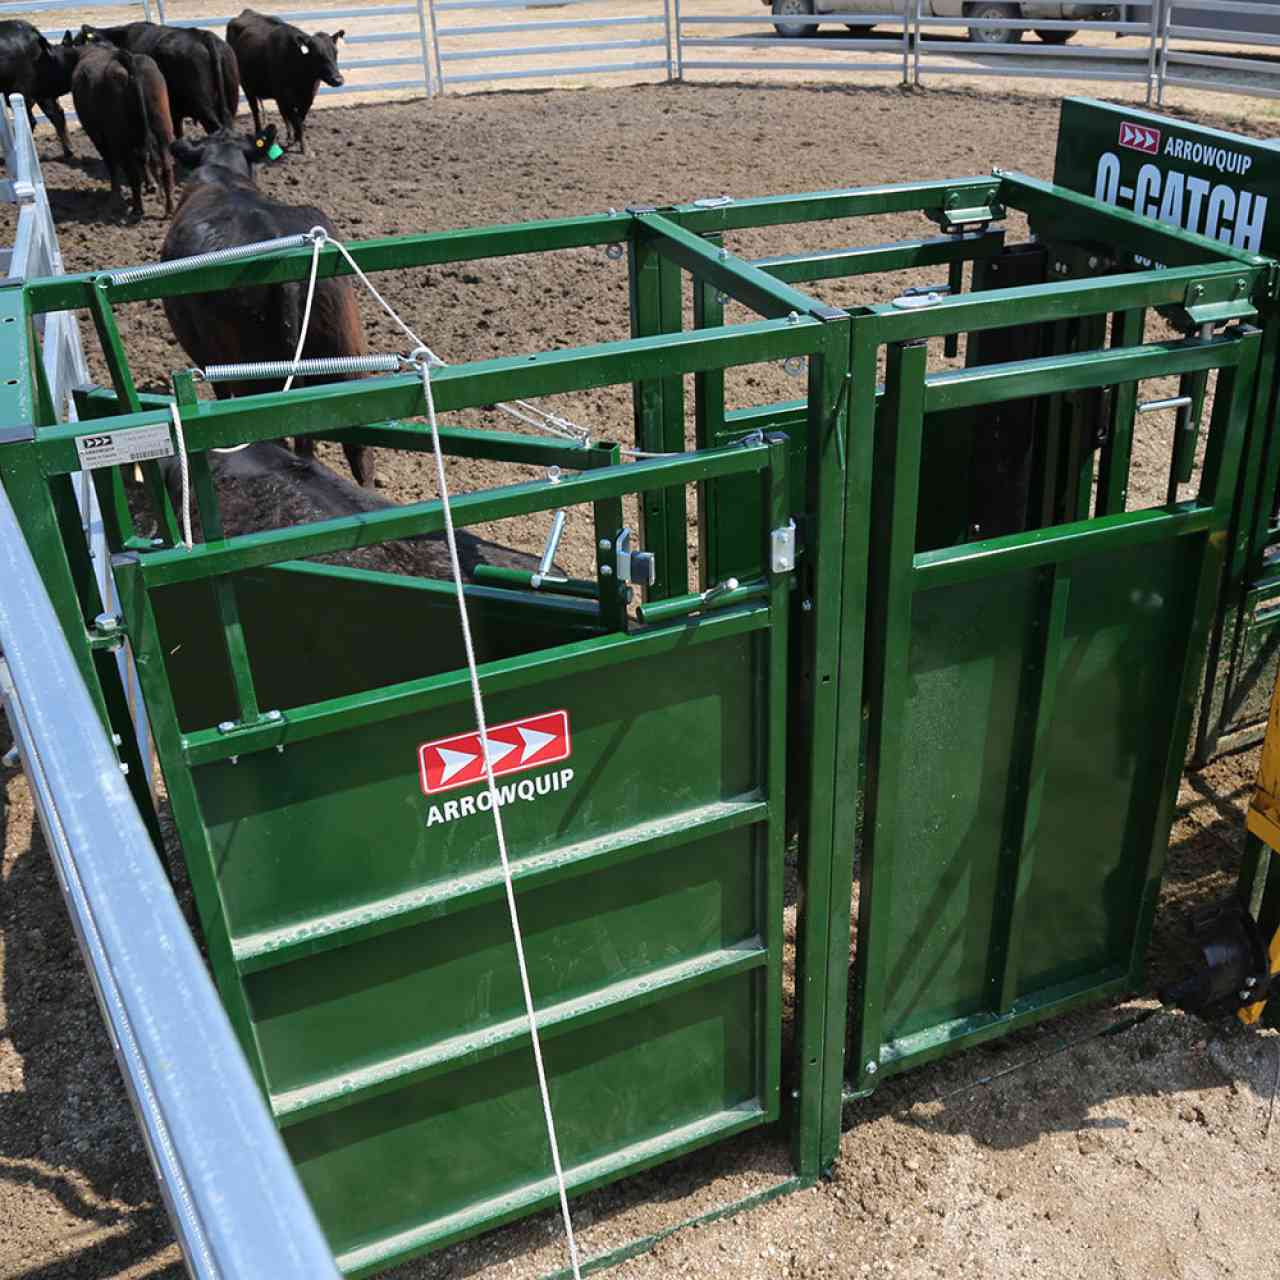 Above image of cattle sorting gate